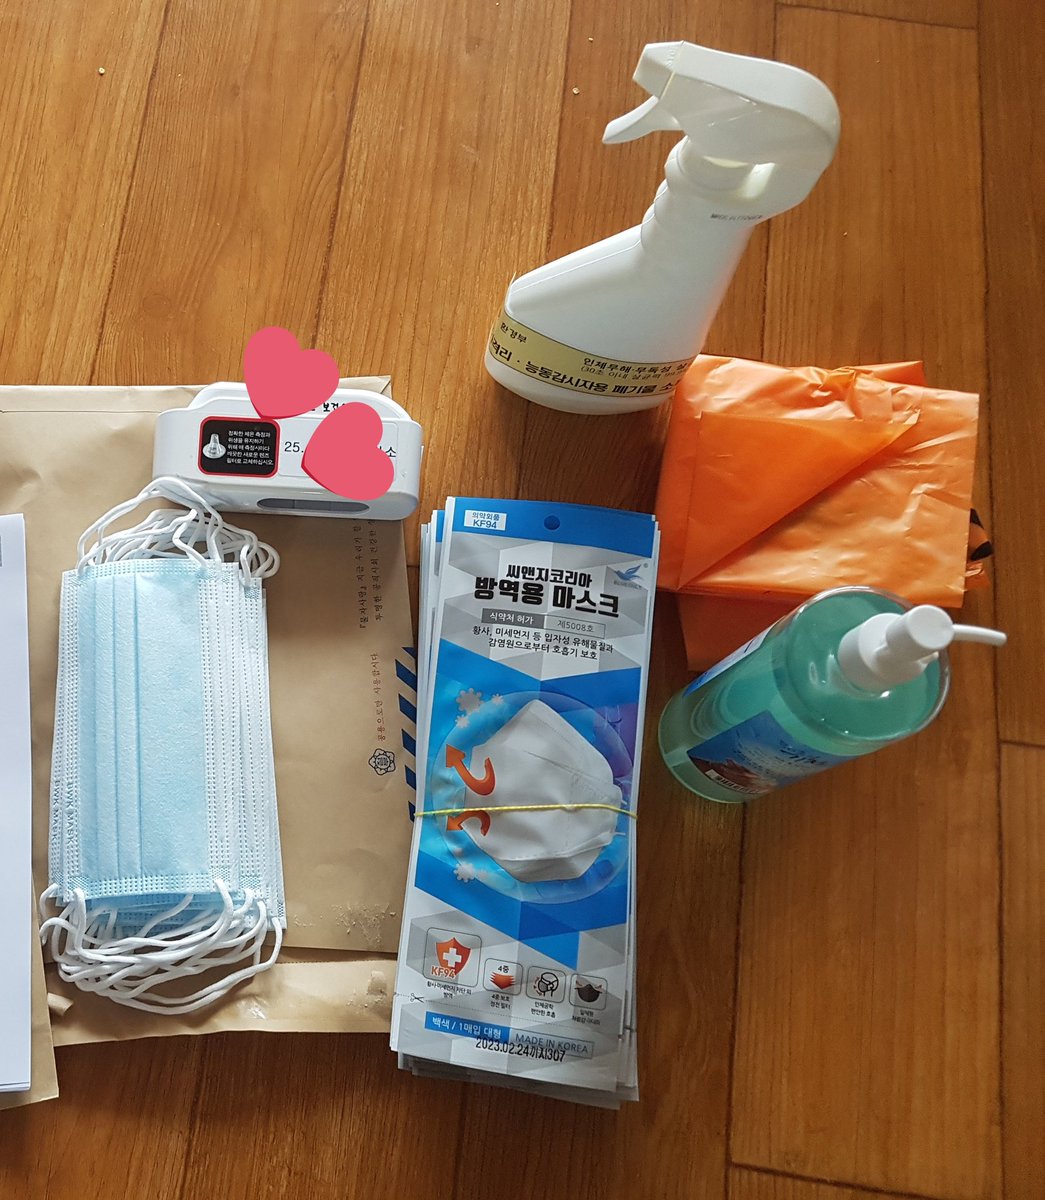 As soon as they arrived home they received a call from their GO to drop off packages with 14 masks, hand sanitizer, thermometer, cleaning supplies, trash bags to avoid contaminating other areas... and food. The amount of food is what really gets me, as does the ChocoPie 정 